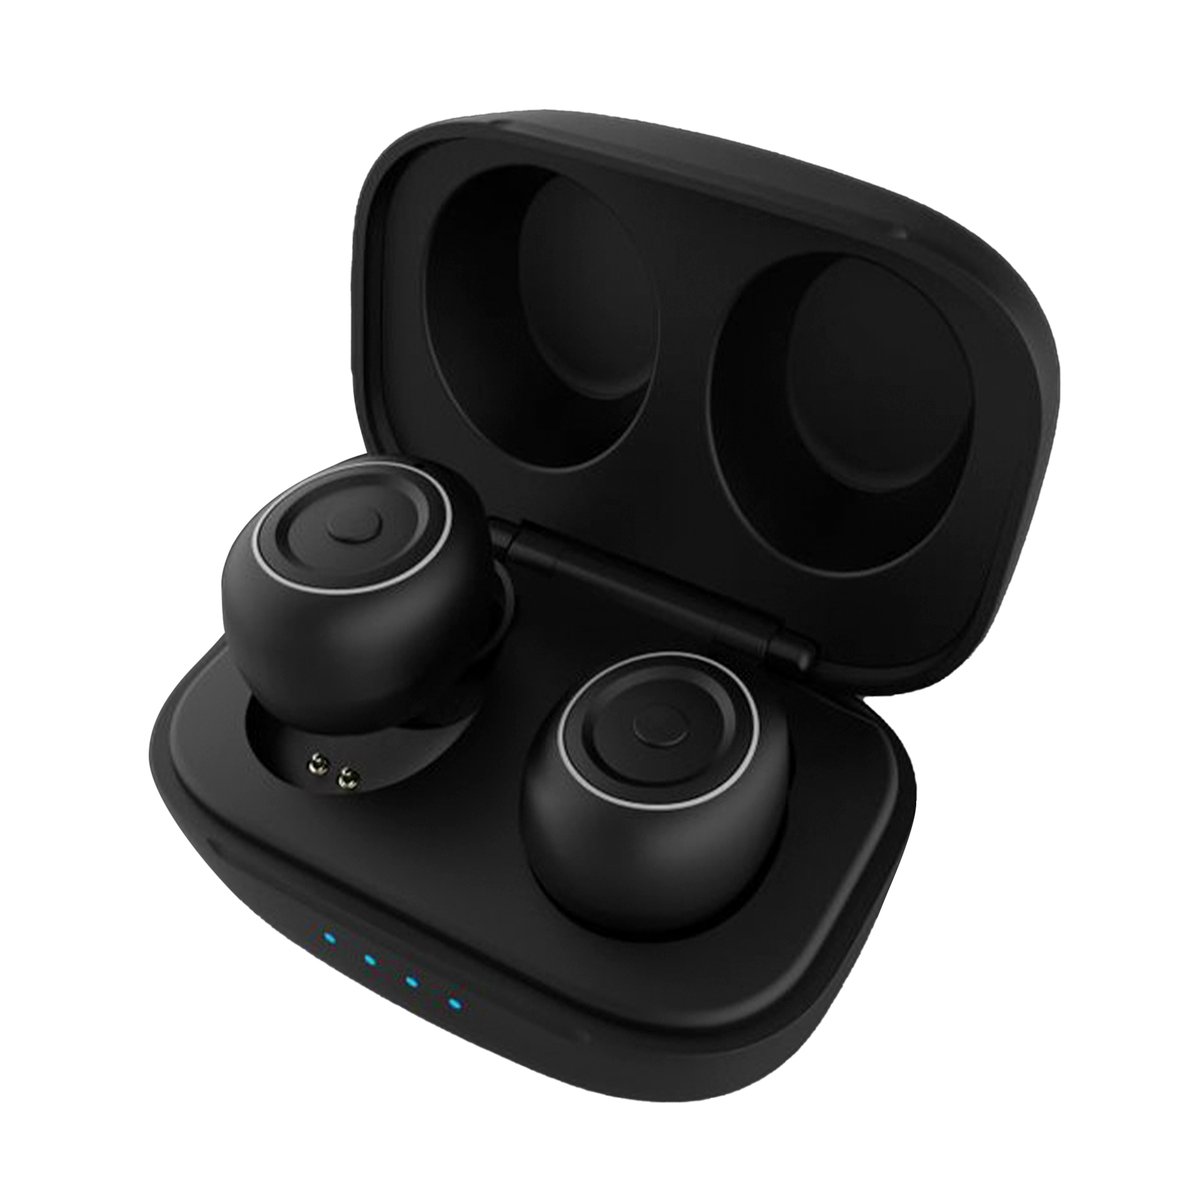 X.cell Soul 3 True Wireless Buds with Type-C Charging Case Black